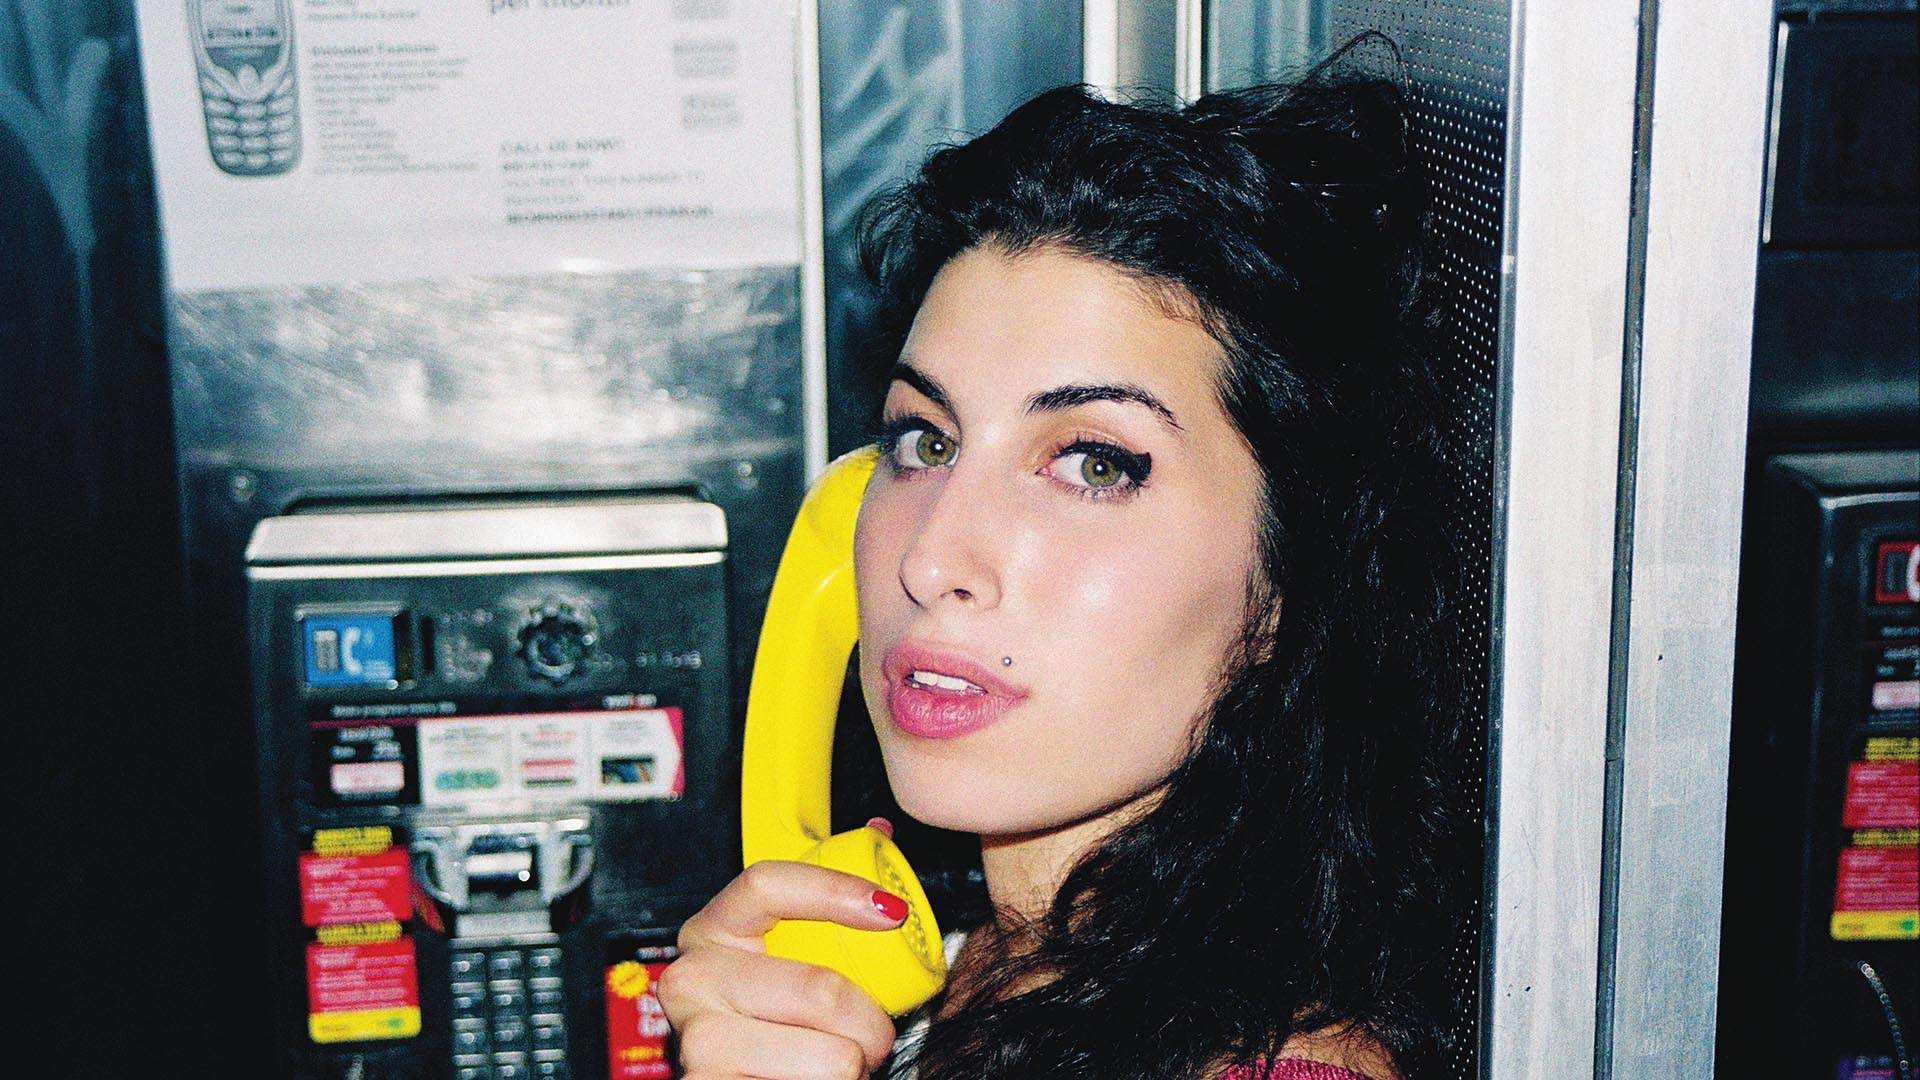 An Amy Winehouse Exhibition Focusing on the Singer's Early Career Is Coming to Australia This Spring